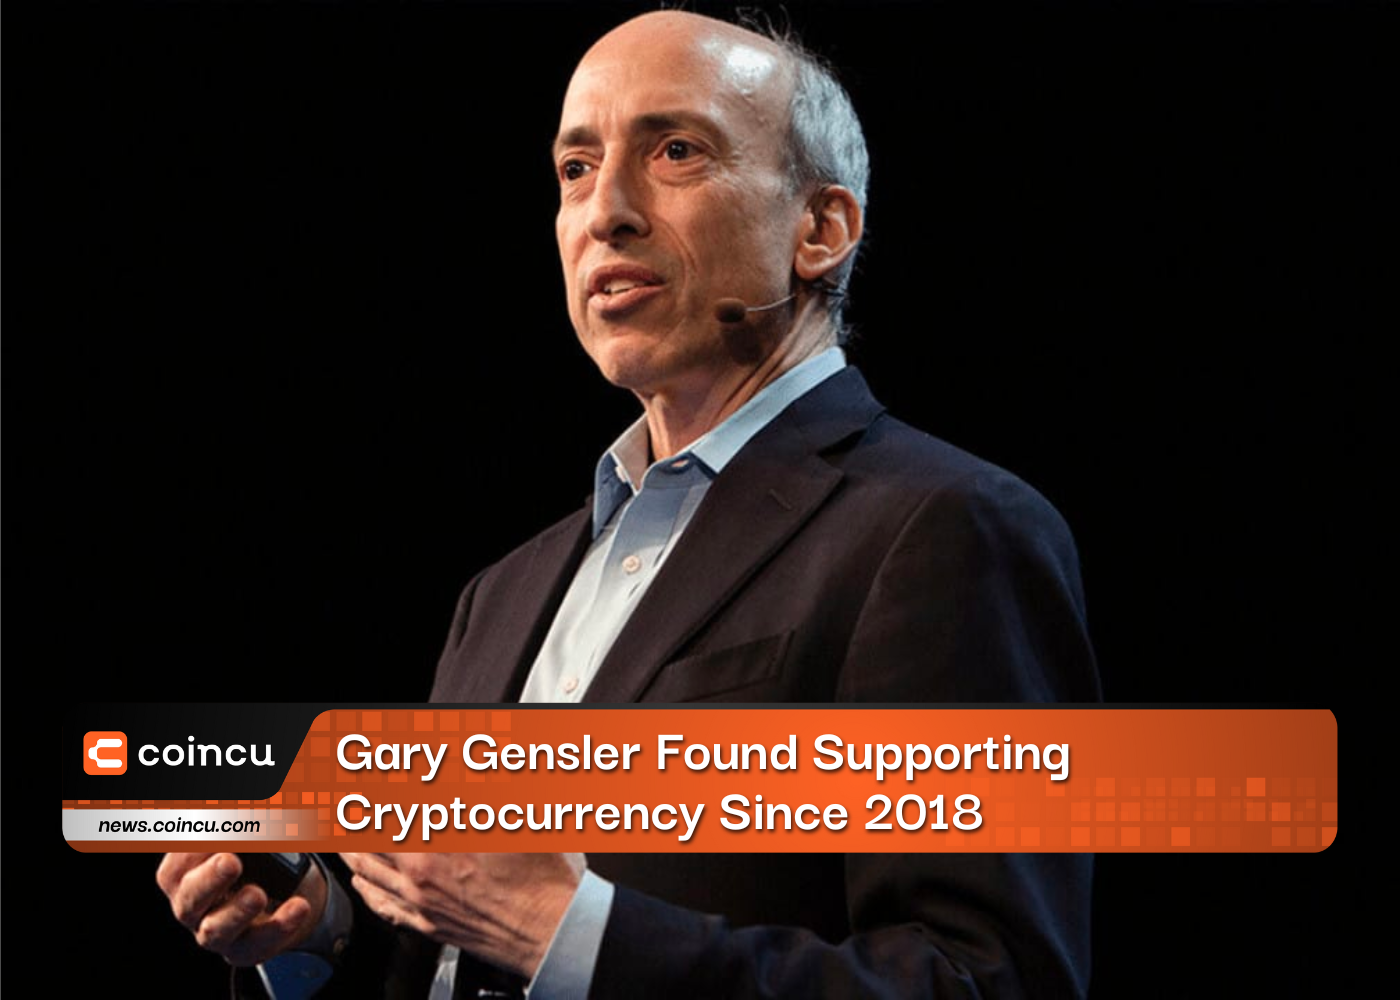 Gary Gensler Found Supporting Cryptocurrency Since 2018